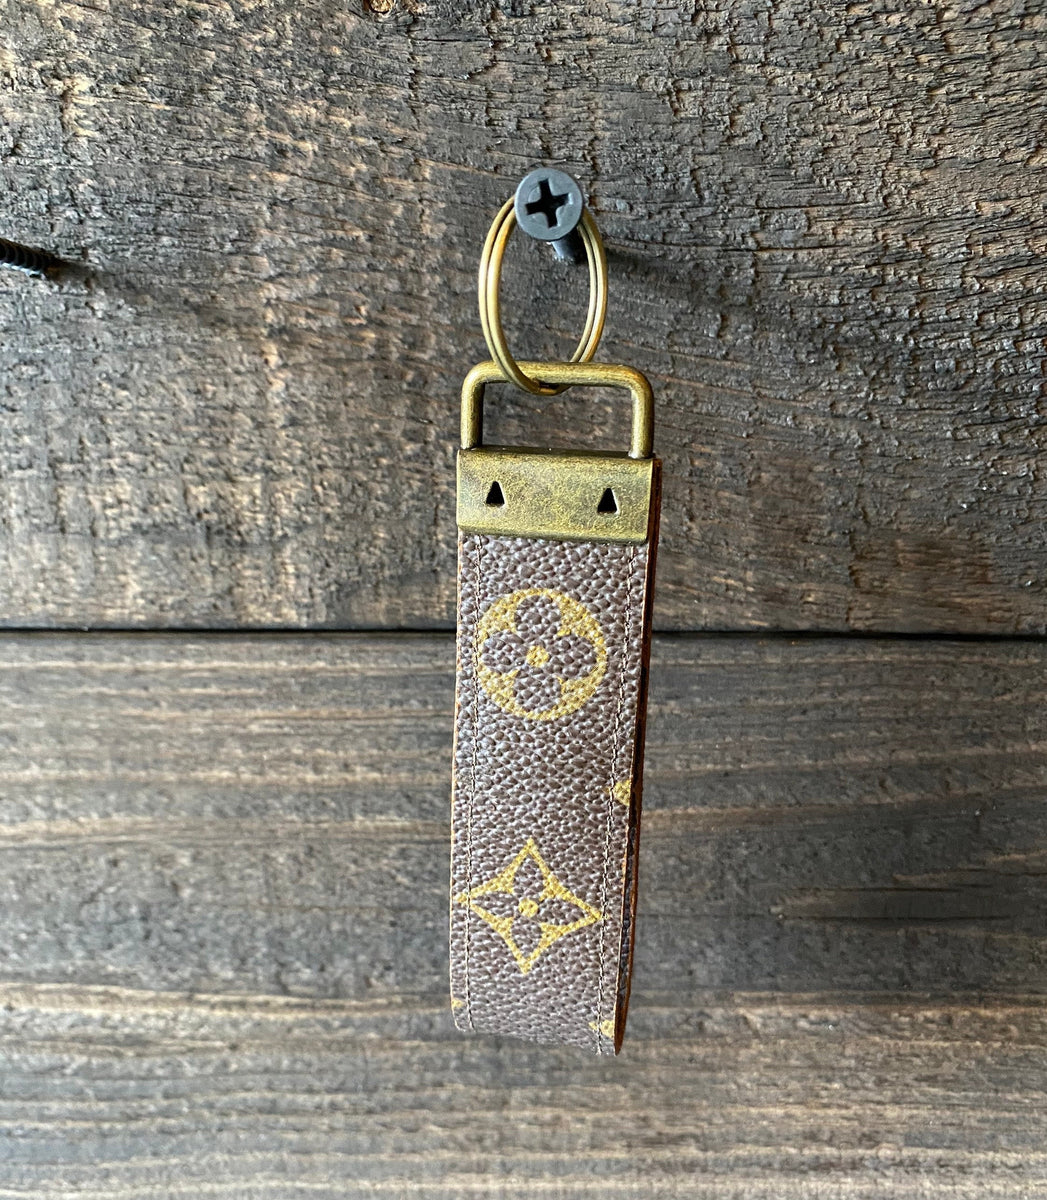 Authentic Upcycled Keyfob – RumHeart